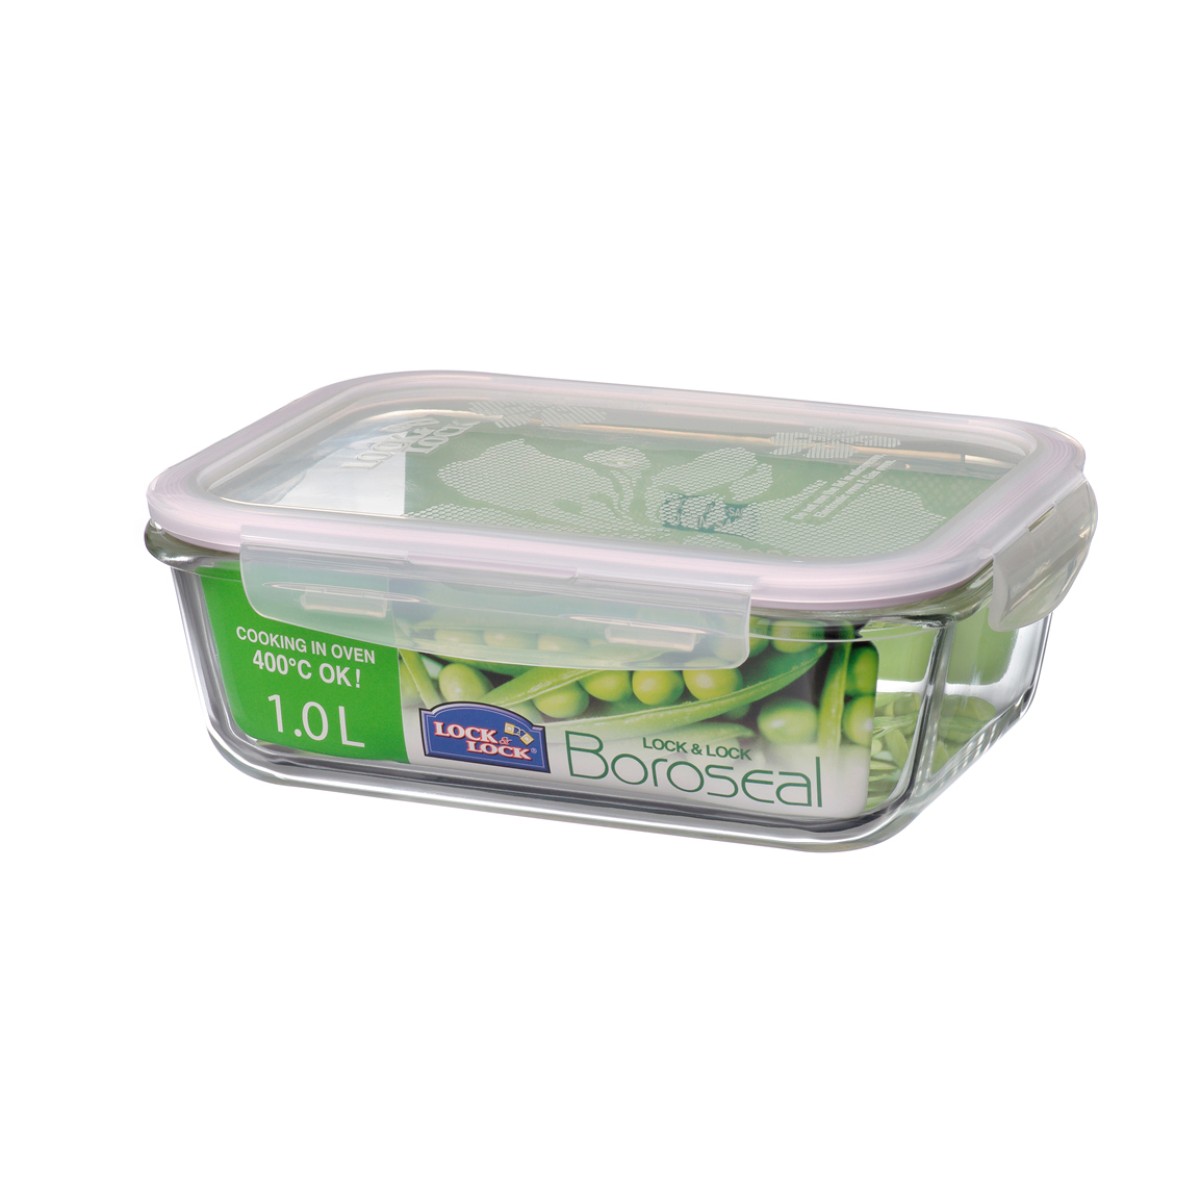 Lock&Lock and Dreamfarm products, Heat resistant glass container 1 L